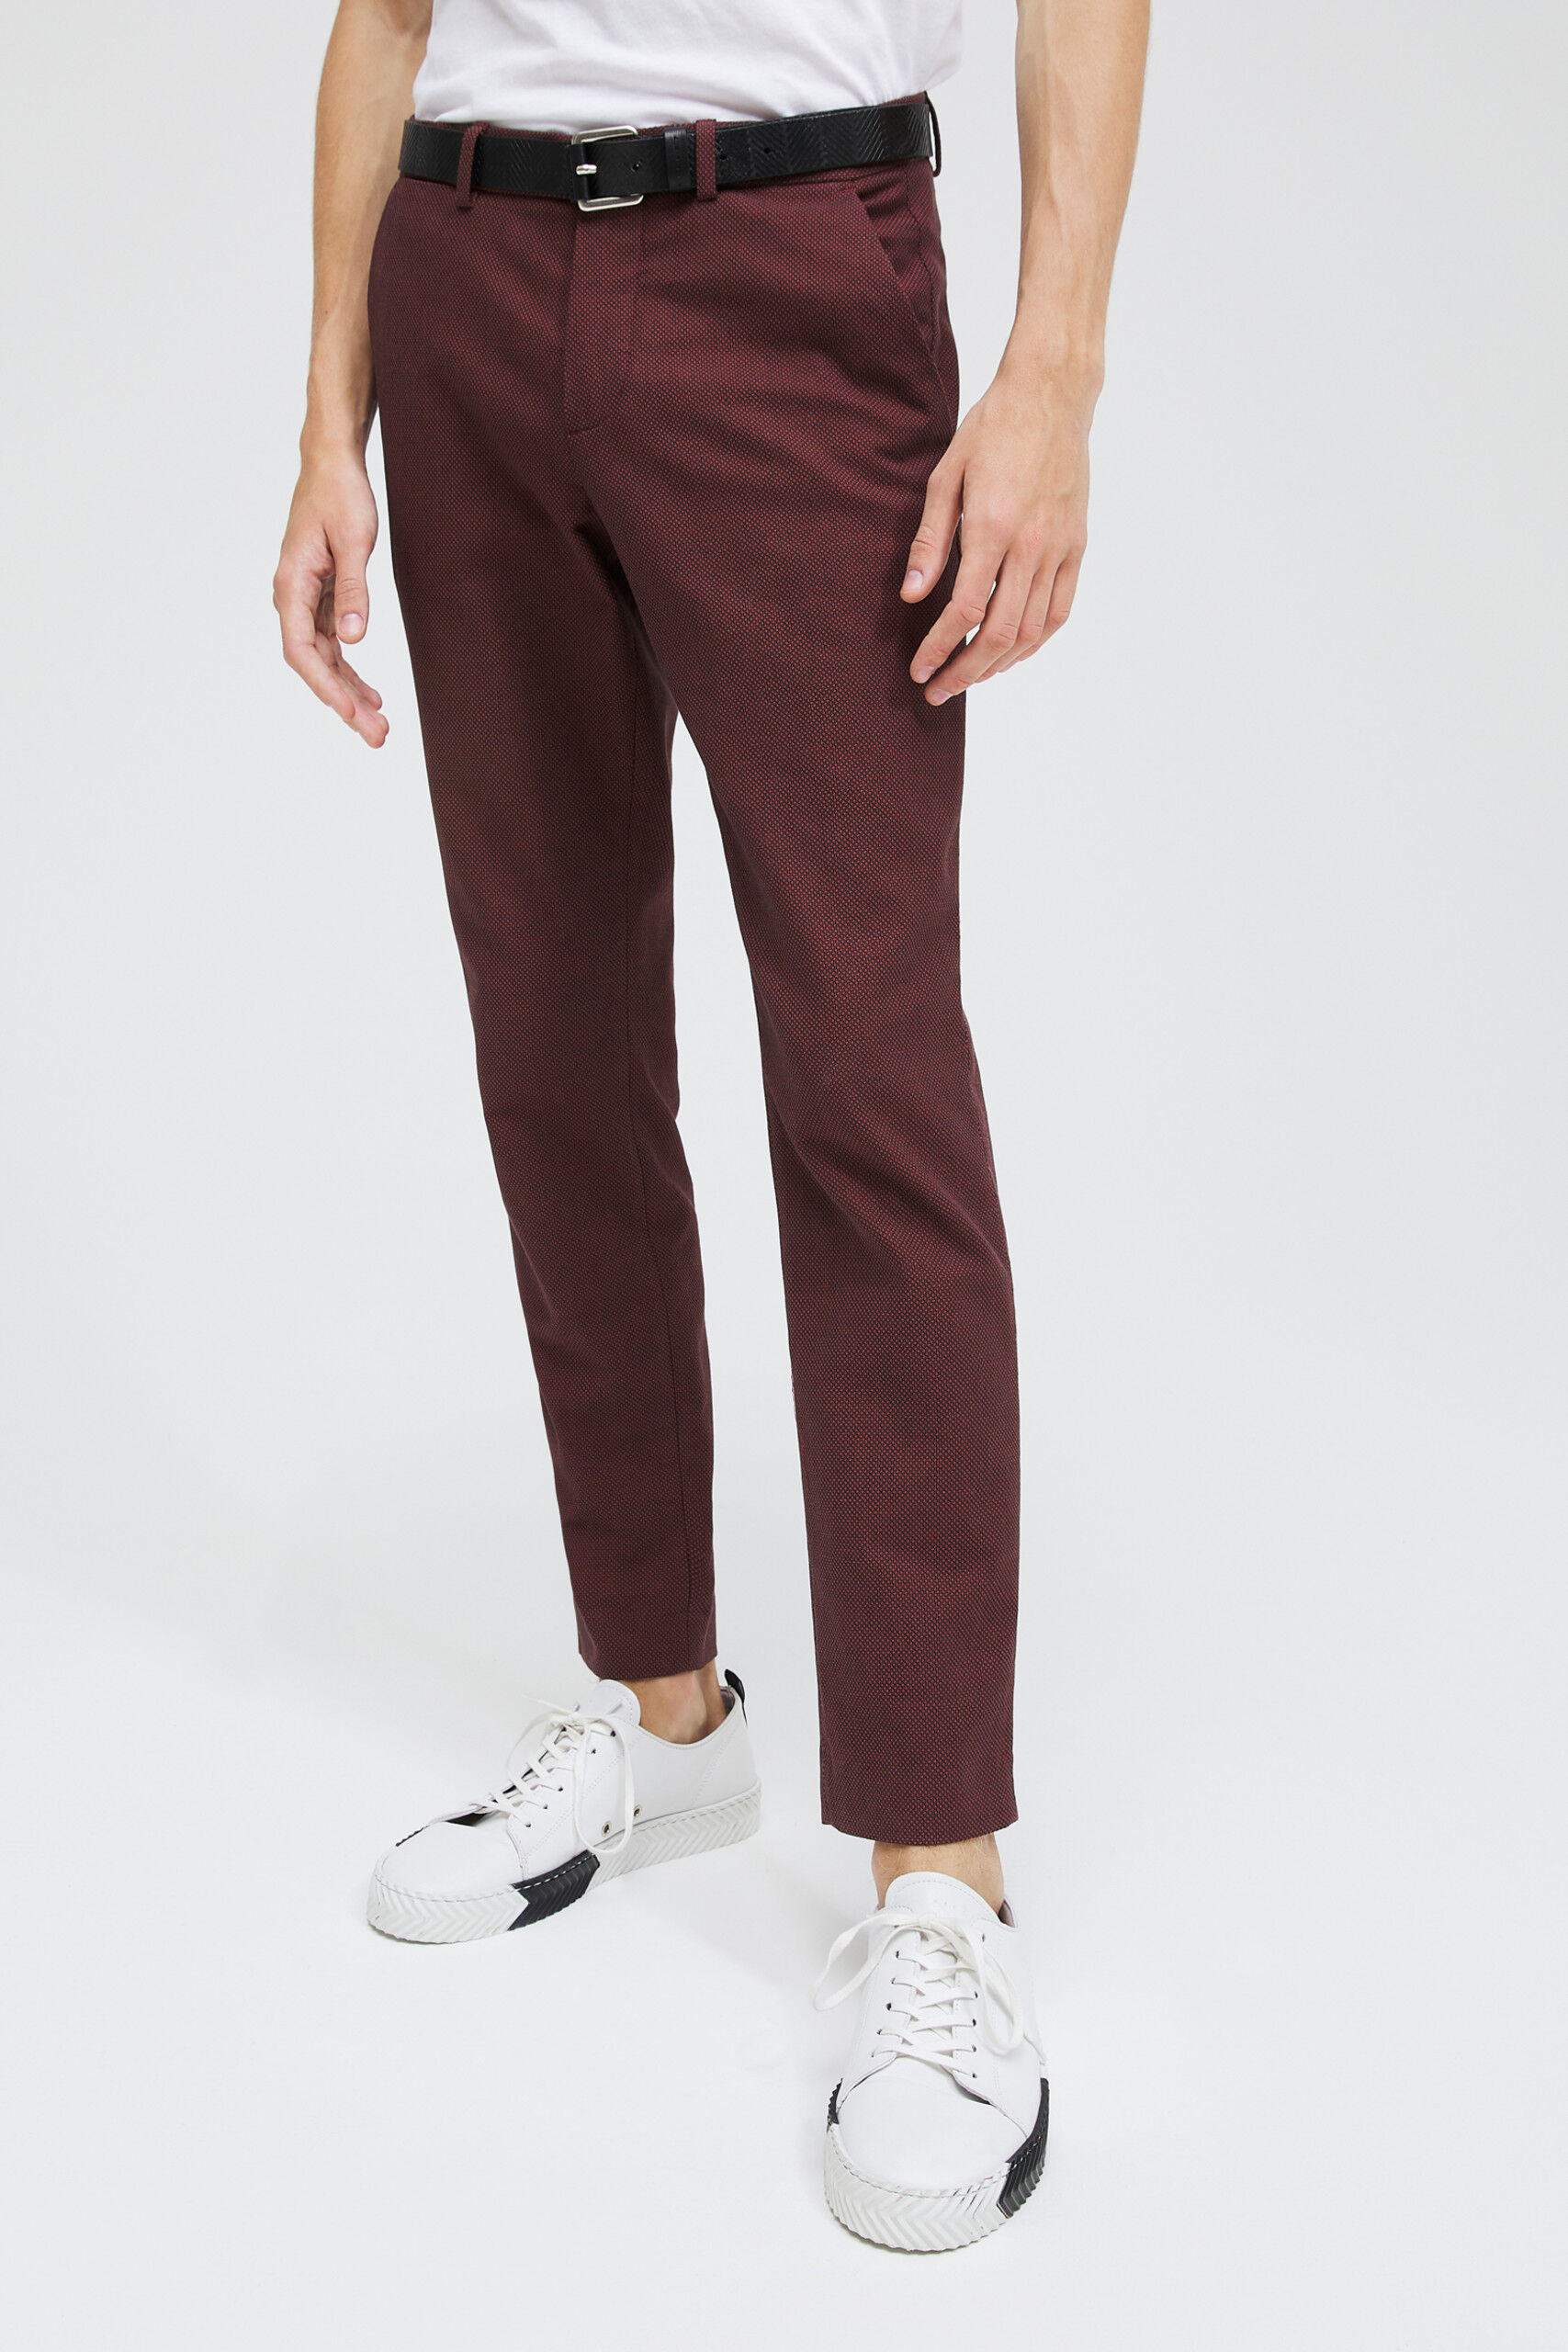 Men's Trousers Collection 2021 | Sisley